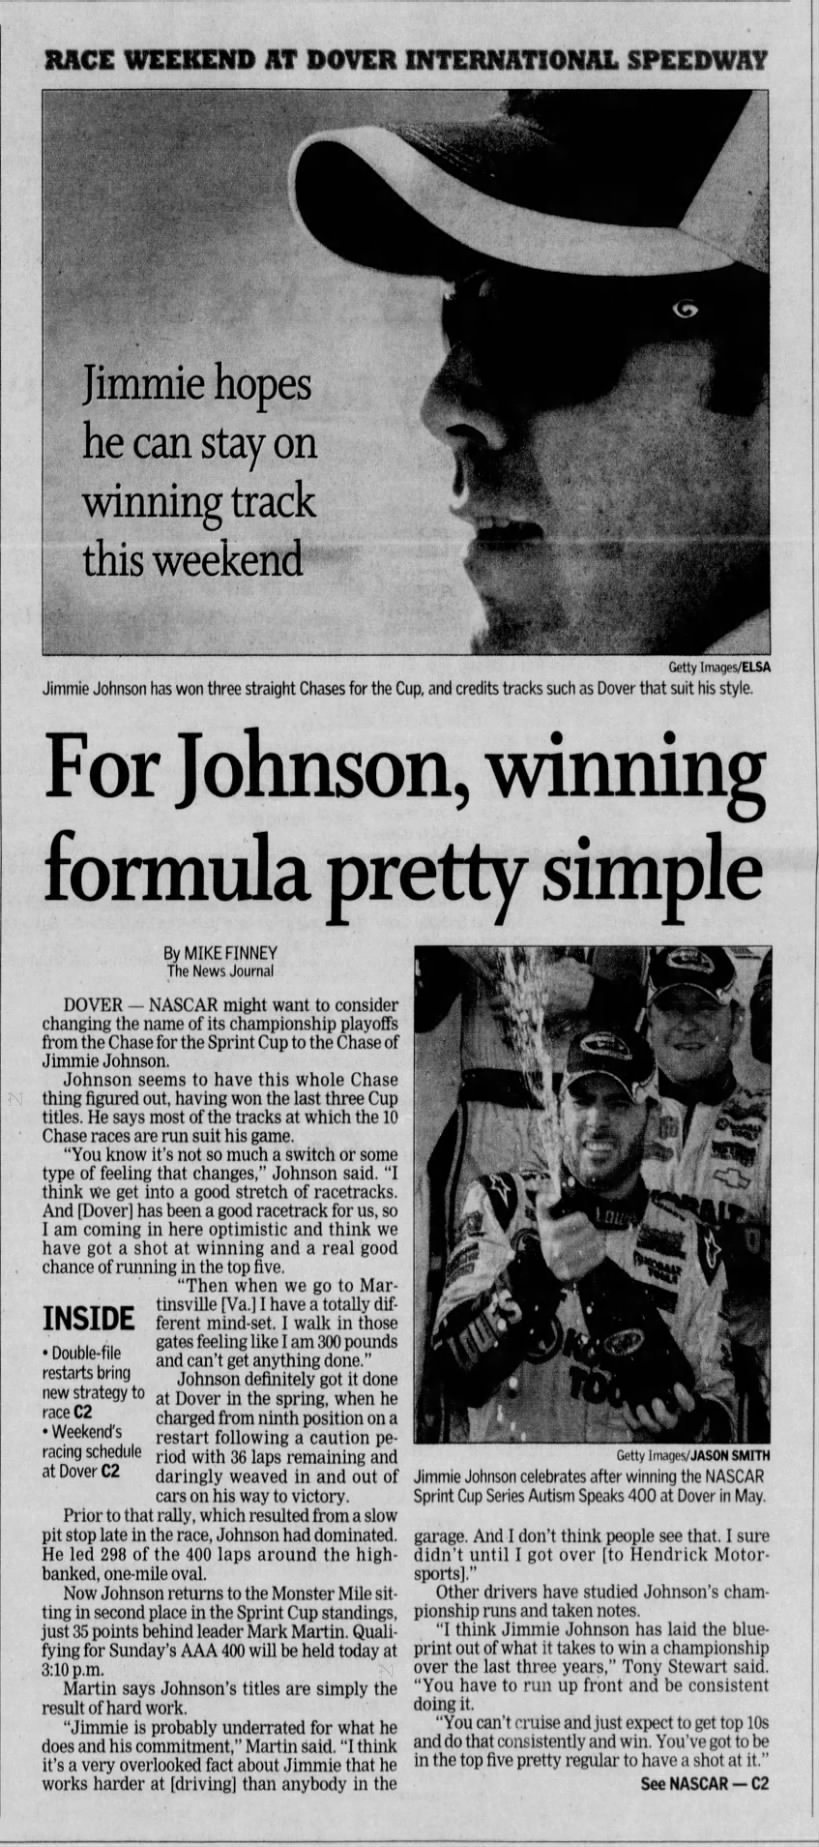 Jimmie Johnson AAA 400 Pre-Article (The News Journal; 25 September 2009; Page C1)